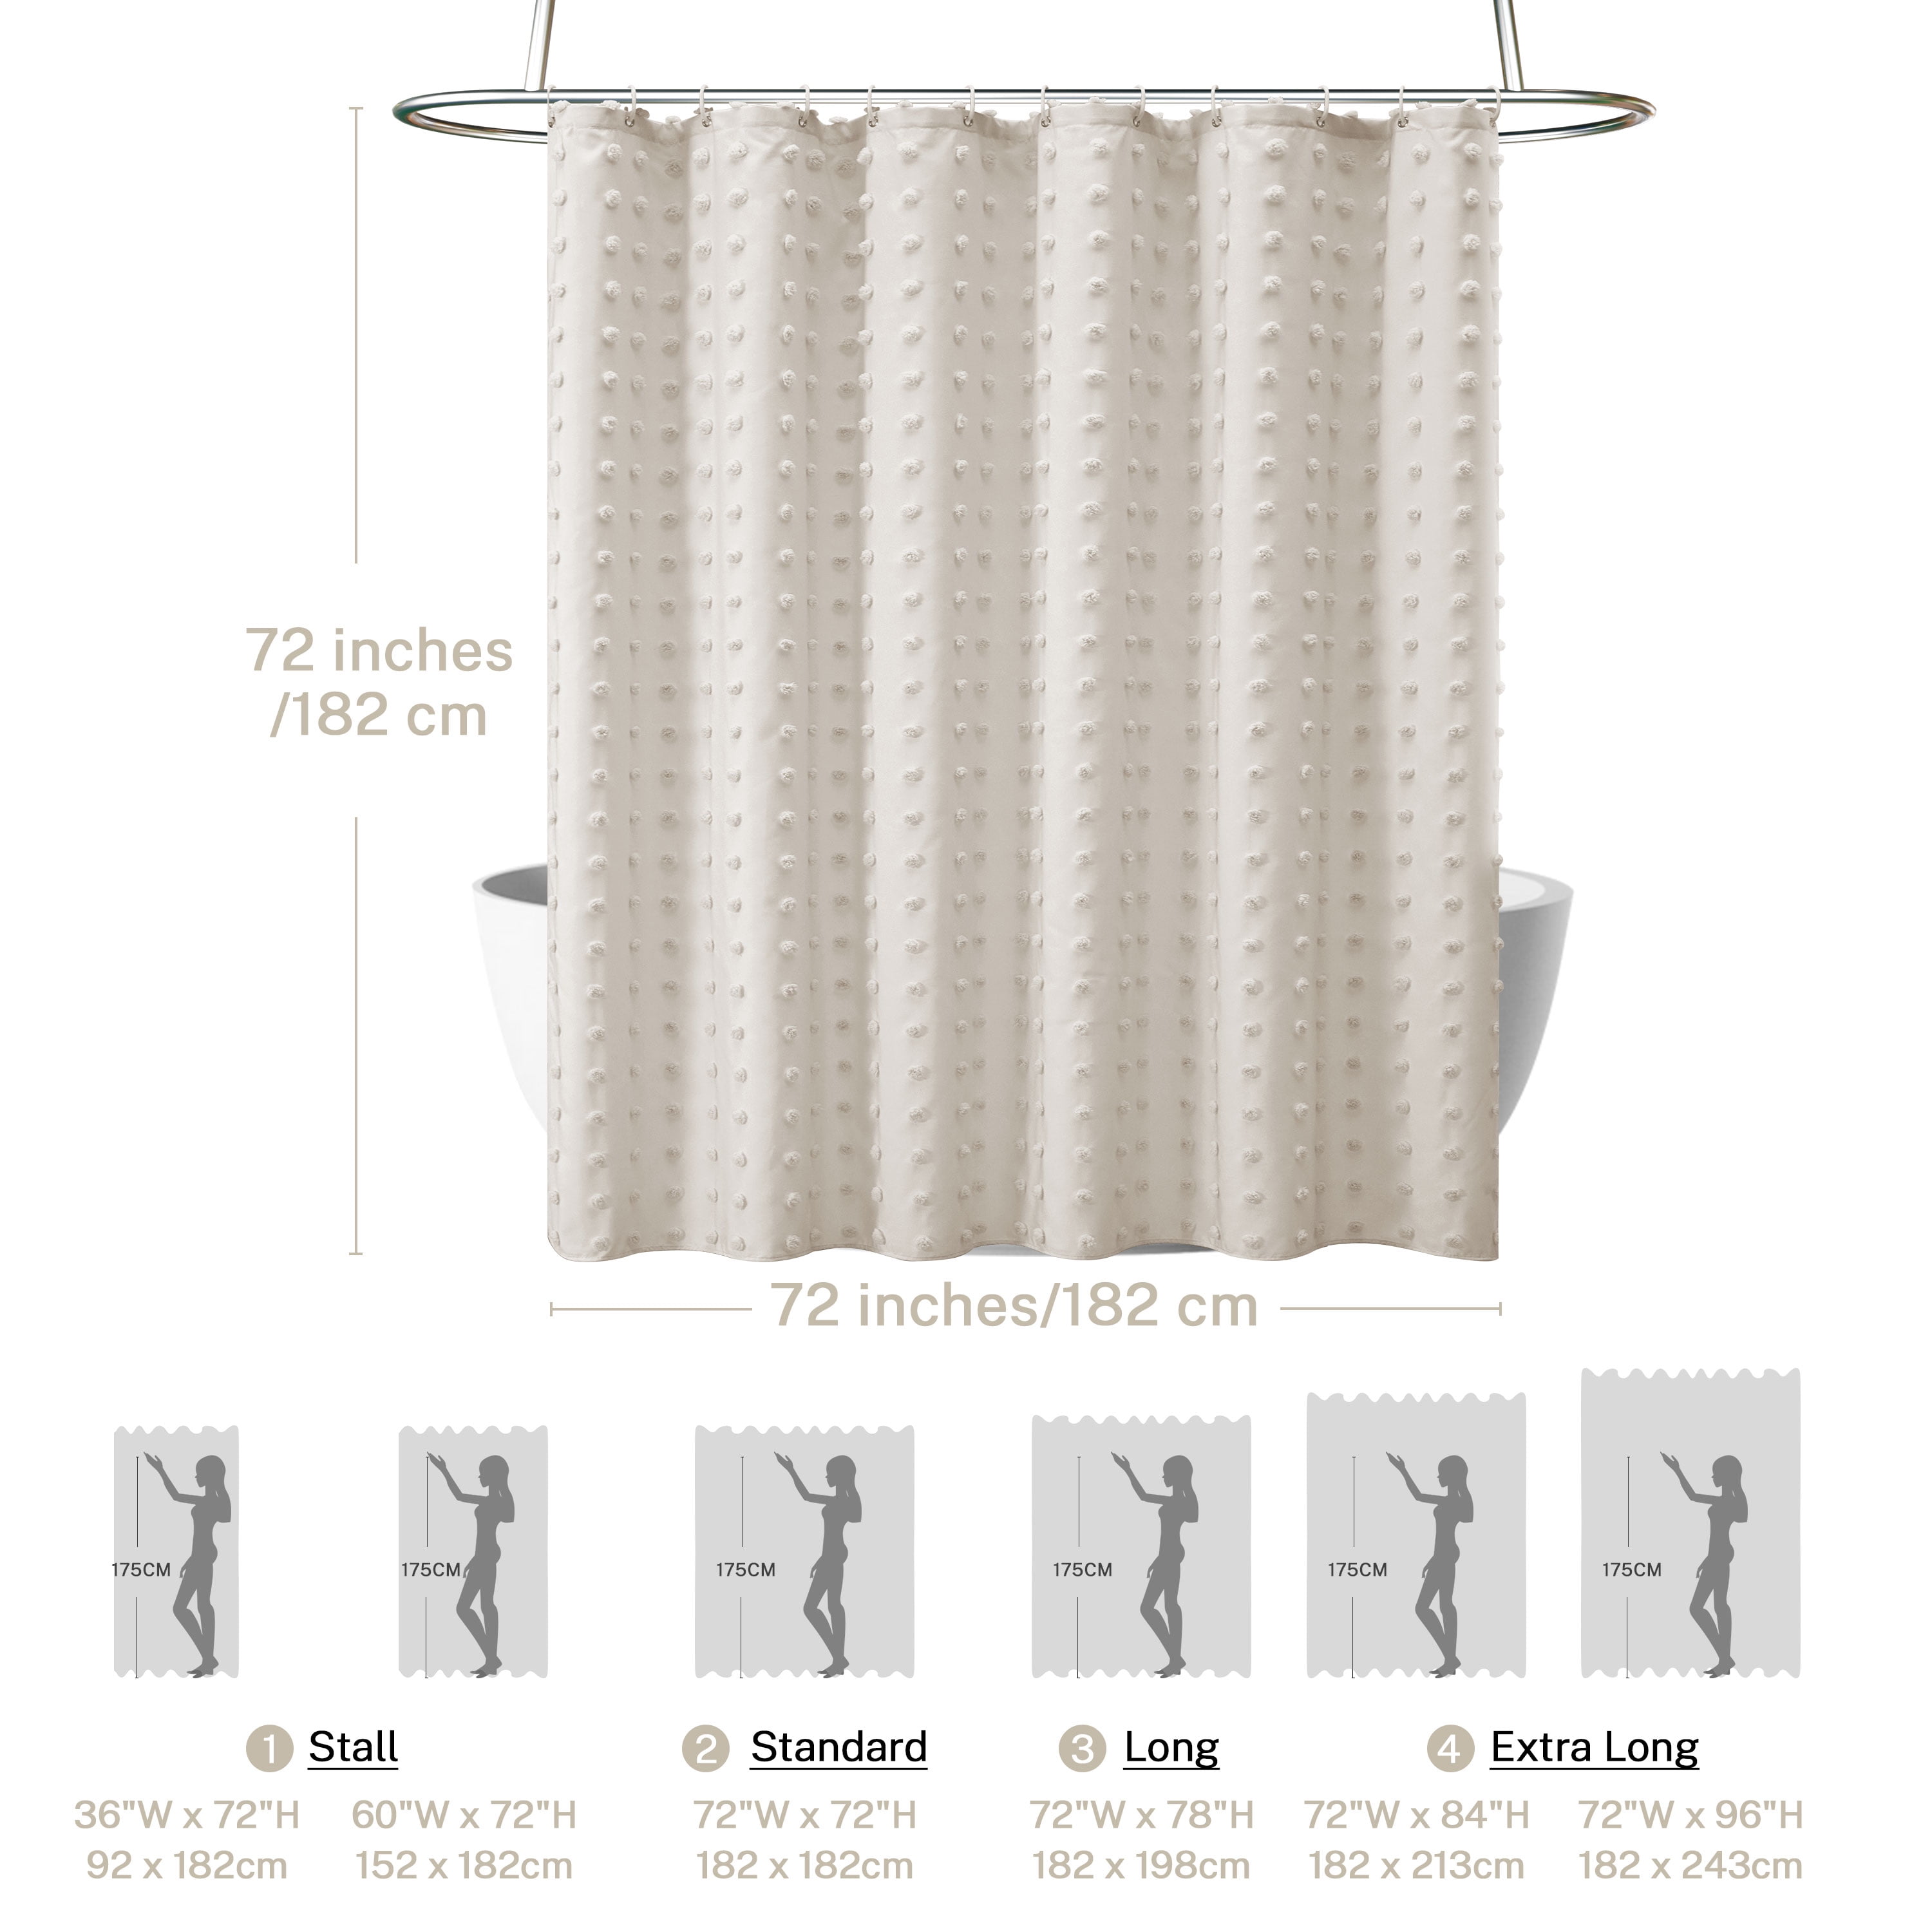 BTTN Extra Long Shower Curtain - 72x84 Inch Long Boho Linen Thick Fabric  Shower Curtain Set with Pla…See more BTTN Extra Long Shower Curtain - 72x84